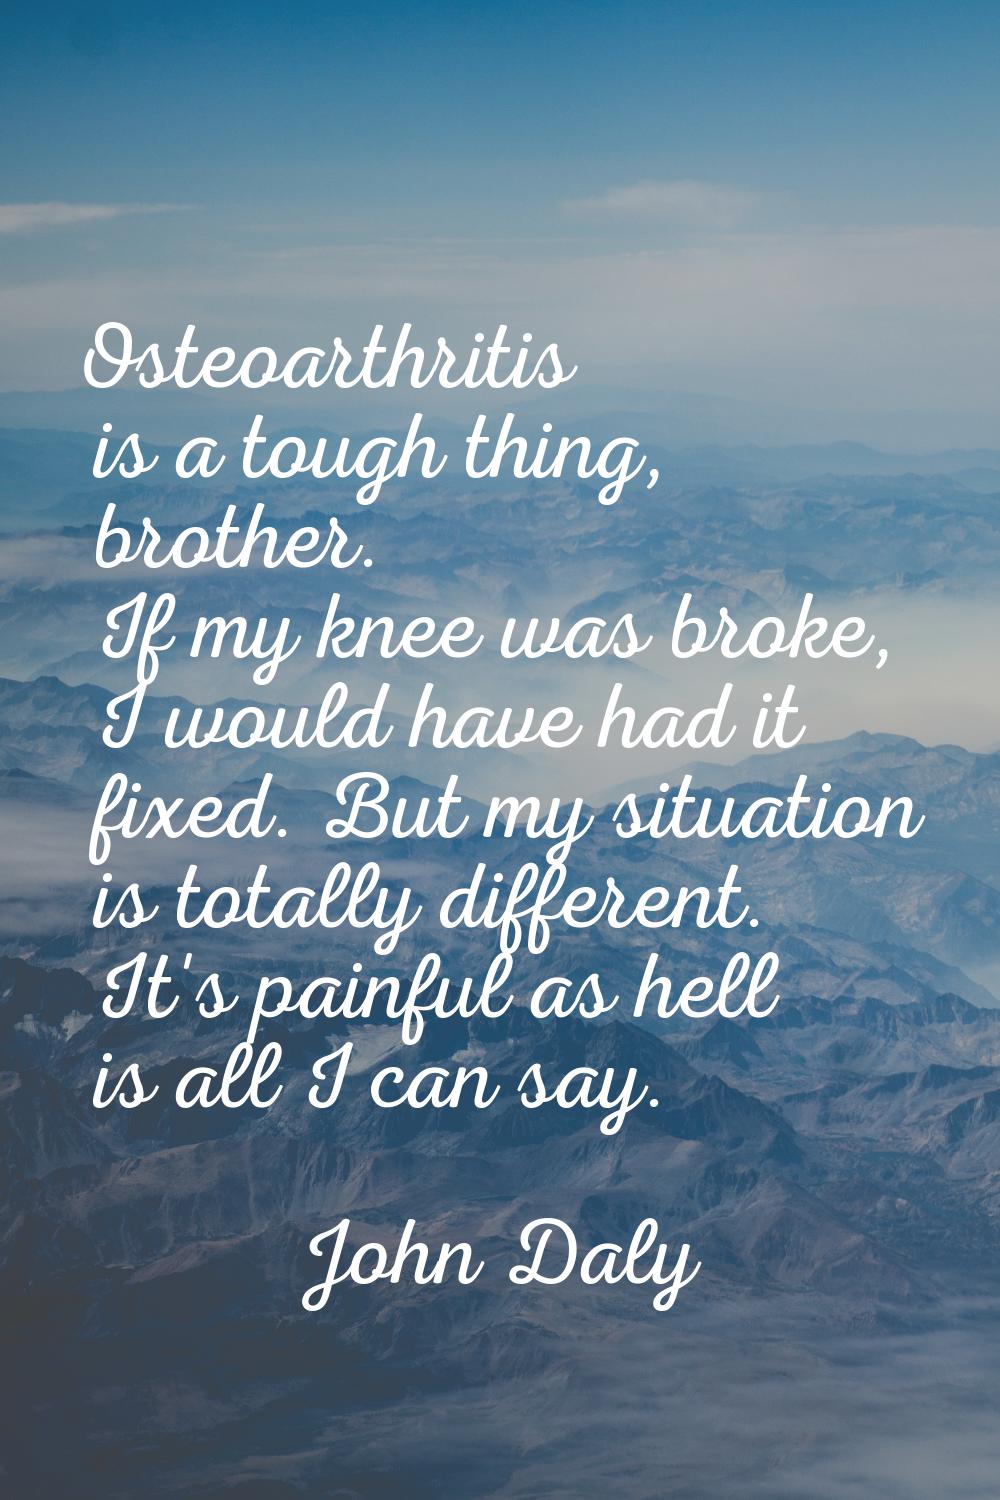 Osteoarthritis is a tough thing, brother. If my knee was broke, I would have had it fixed. But my s